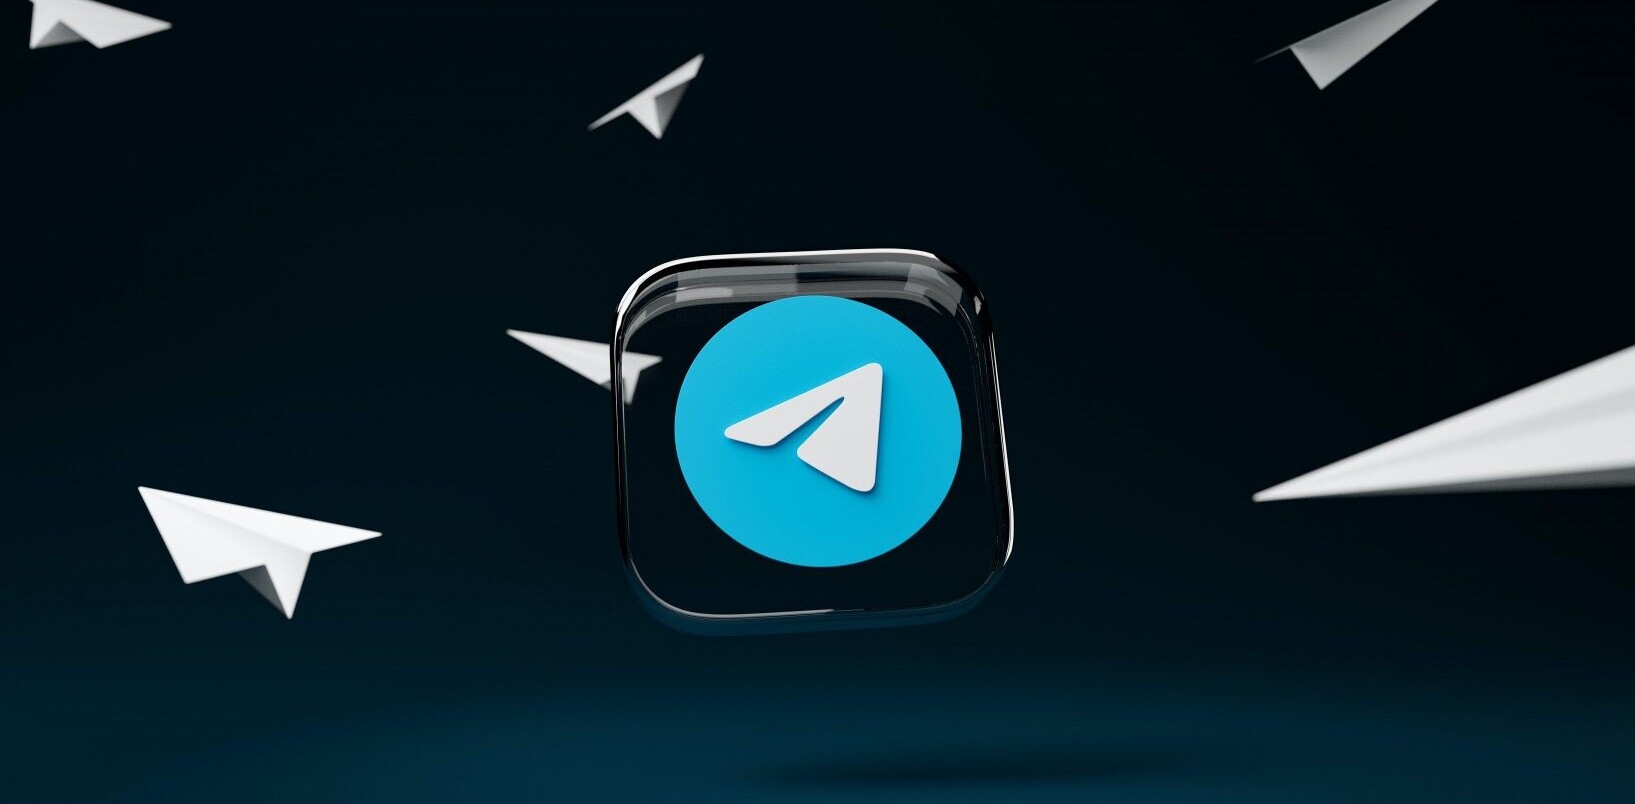 How to use Telegram’s new auto-delete timer feature